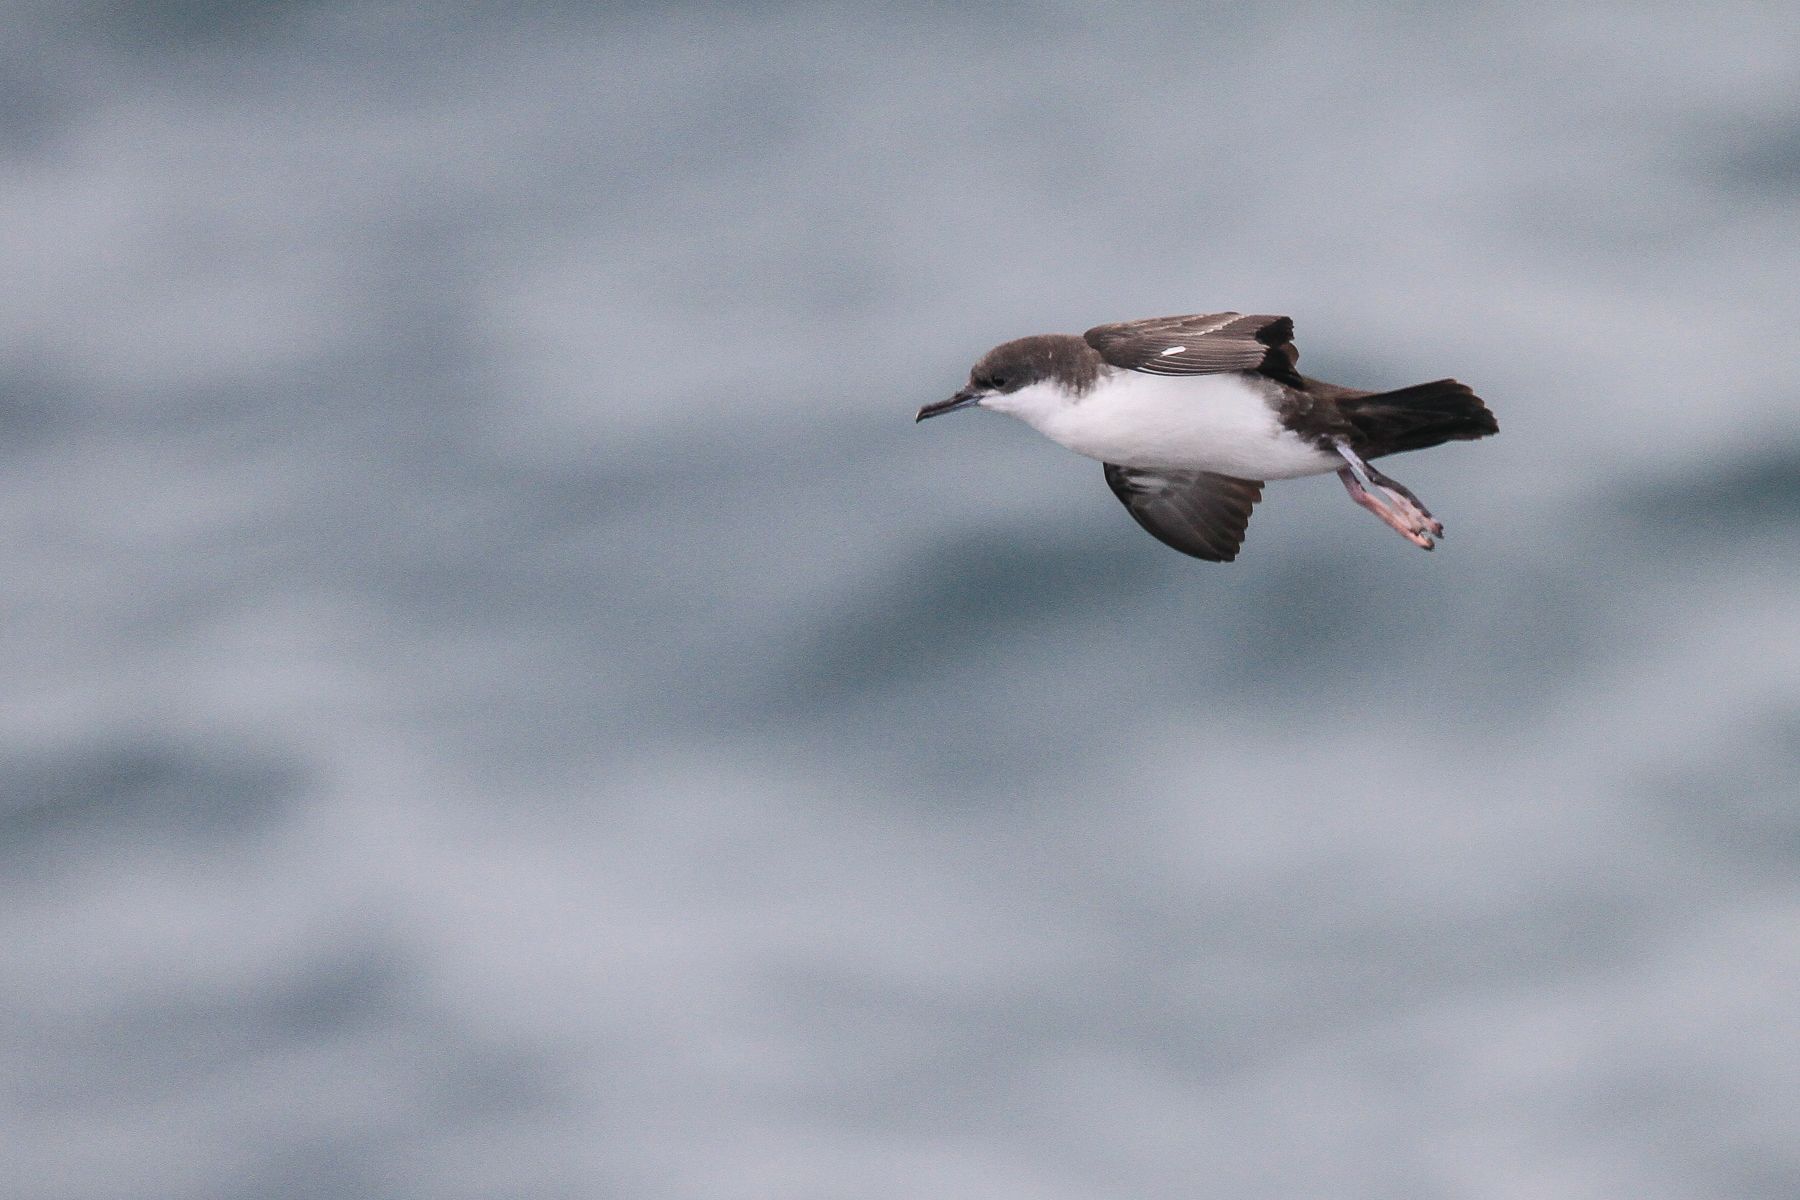 A Galapagos Shearwater brakes with its feet as it approaches its nest site